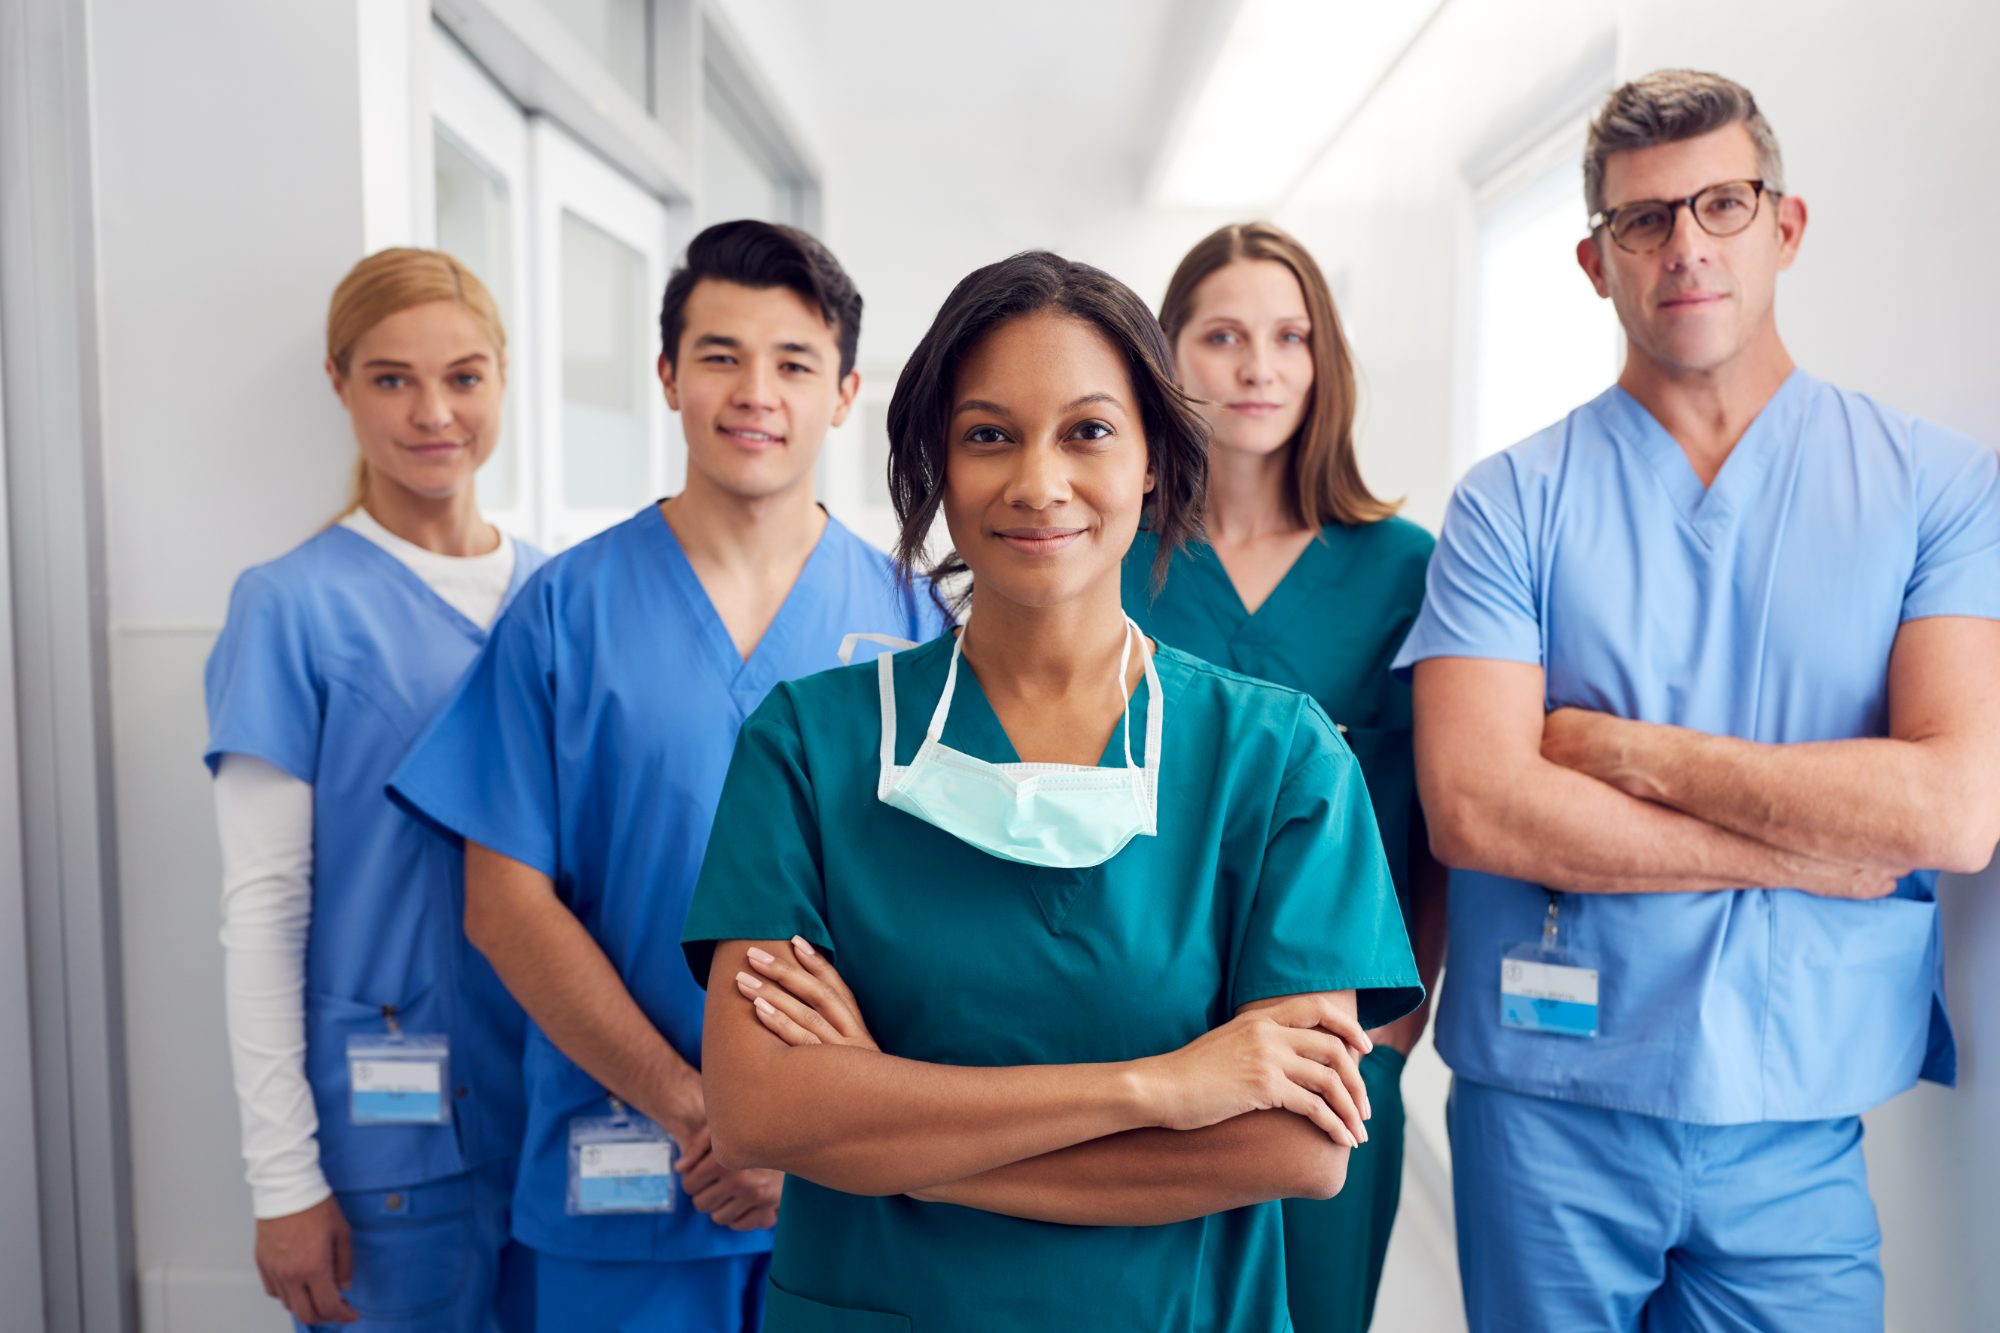 LPN Jobs & Careers: What Can LPNs Do & Where Can They Work?